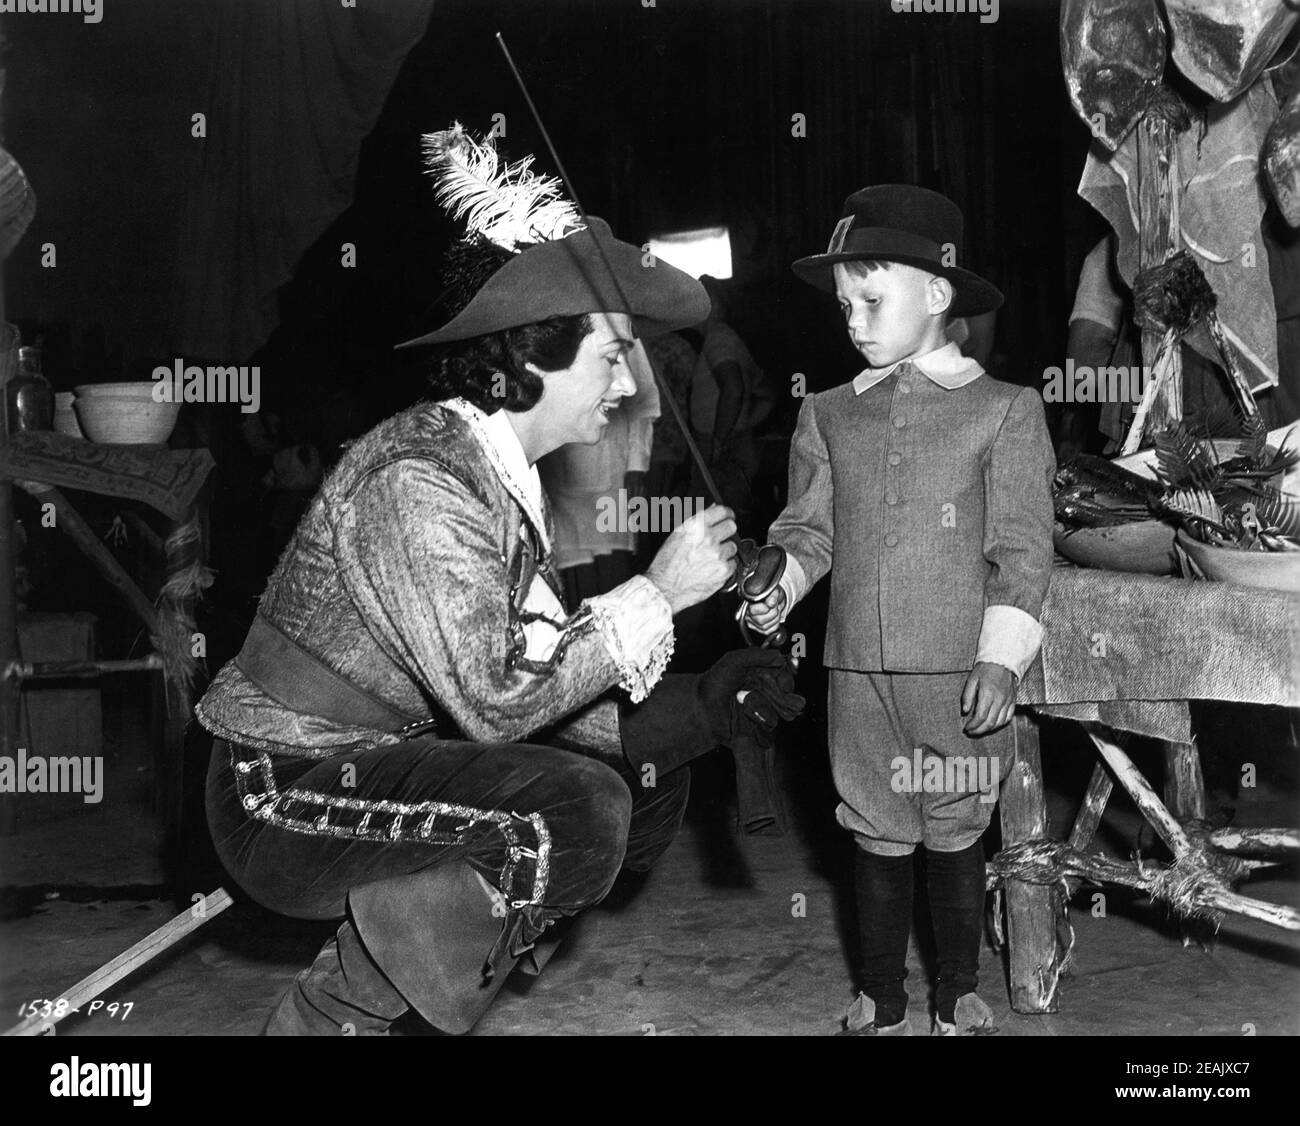 DOUGLAS FAIRBANKS Jr showing Sword to young boy in costume on set candid during making of THE EXILE 1947 director MAX OPHULS producer Douglas Fairbanks Jr Fairbanks Company / Universal - International Stock Photo